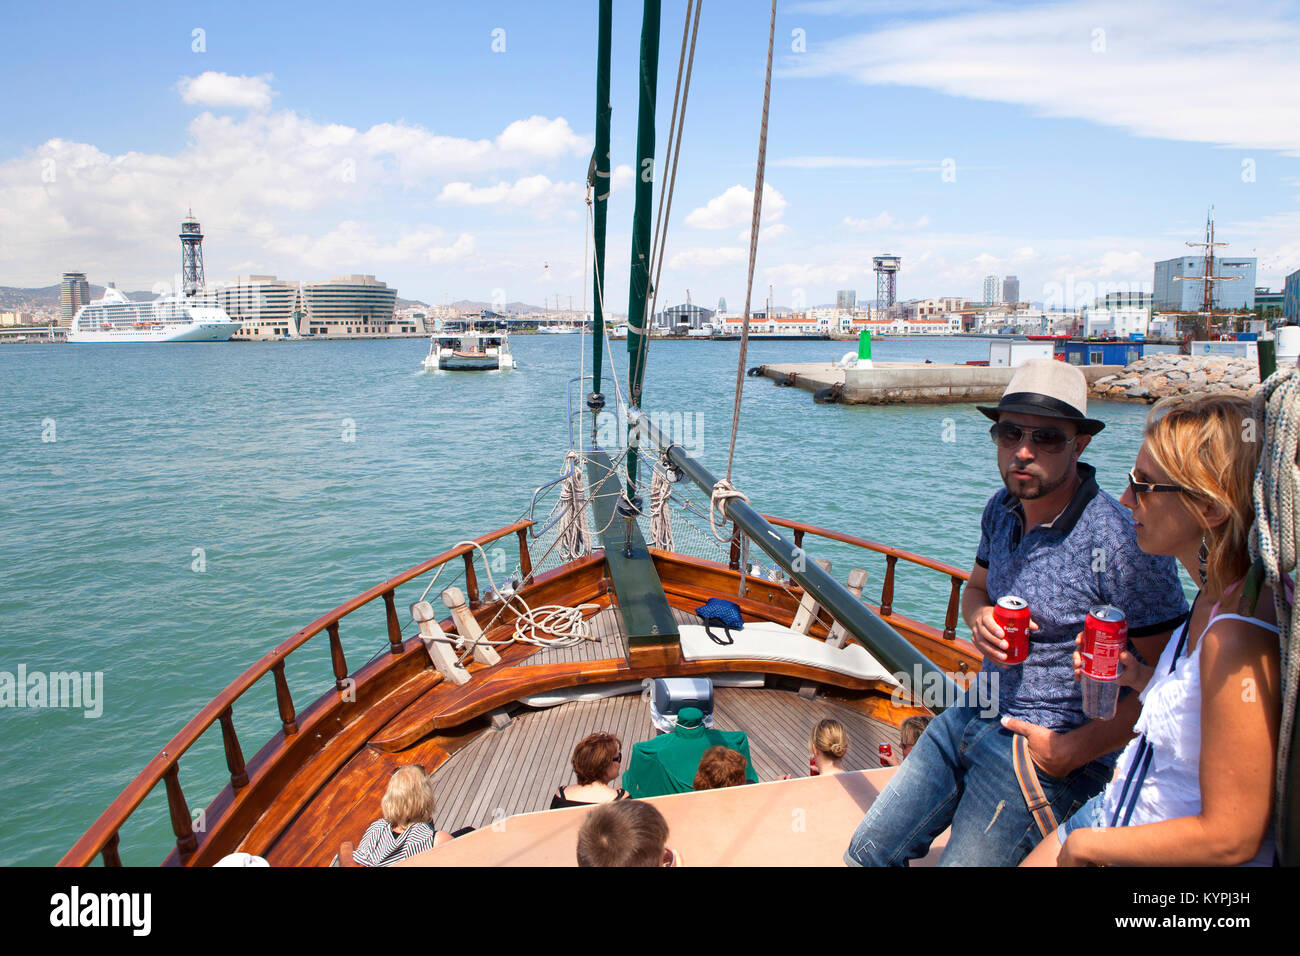 Young family sailing on board the Desigual authentic turkish wooden barquentine boat in Barcelona Port Vell harbour, Spain Stock Photo